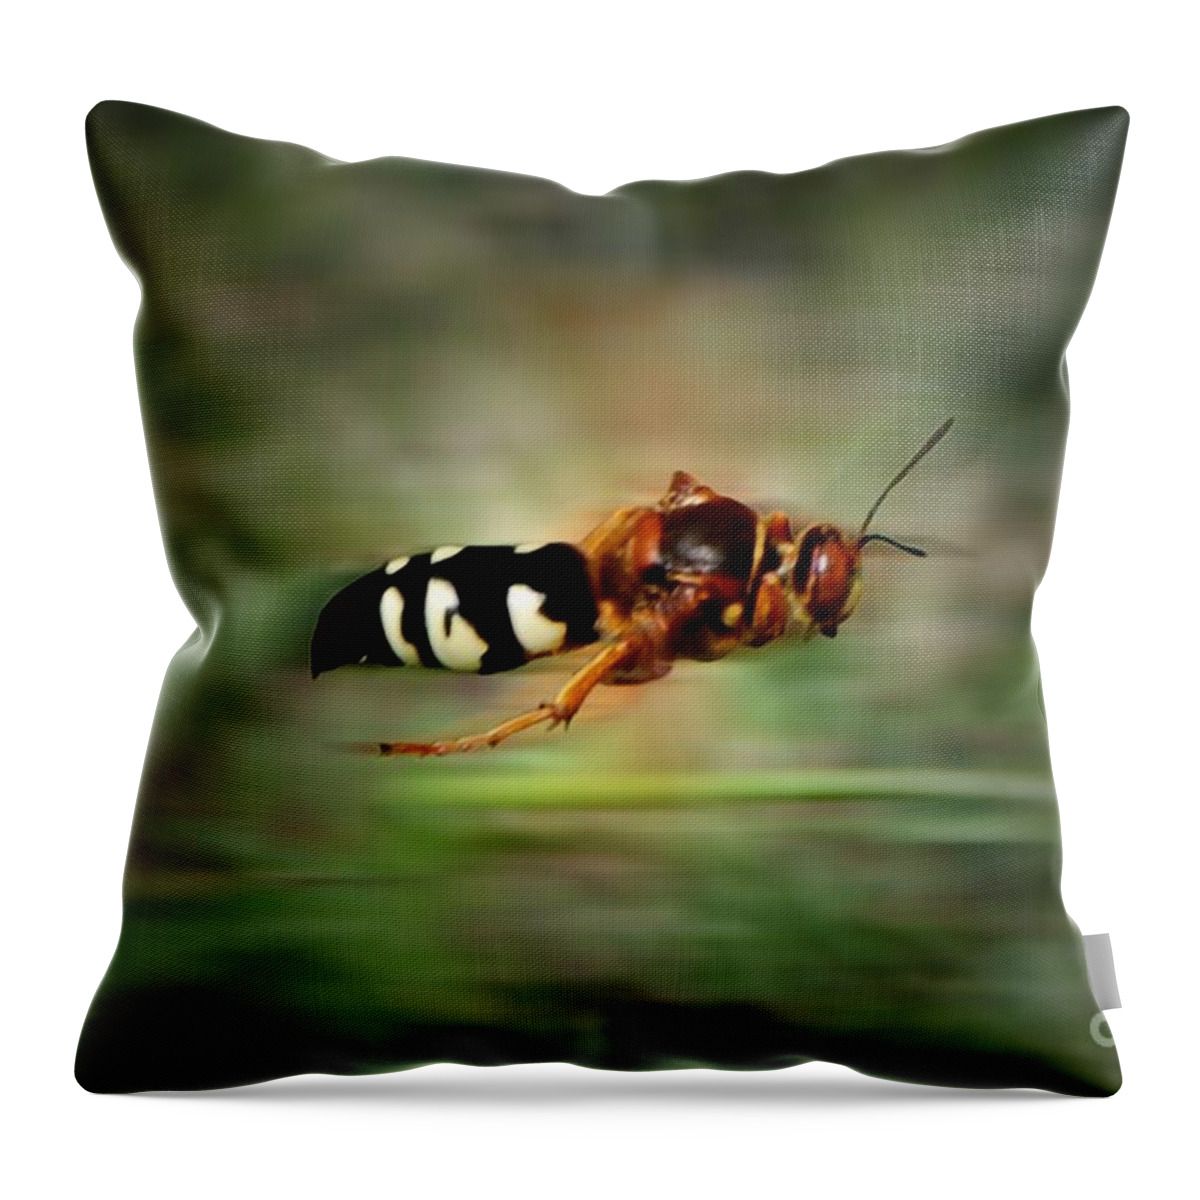 Cicada Throw Pillow featuring the photograph Scouting Mission by Thomas Woolworth